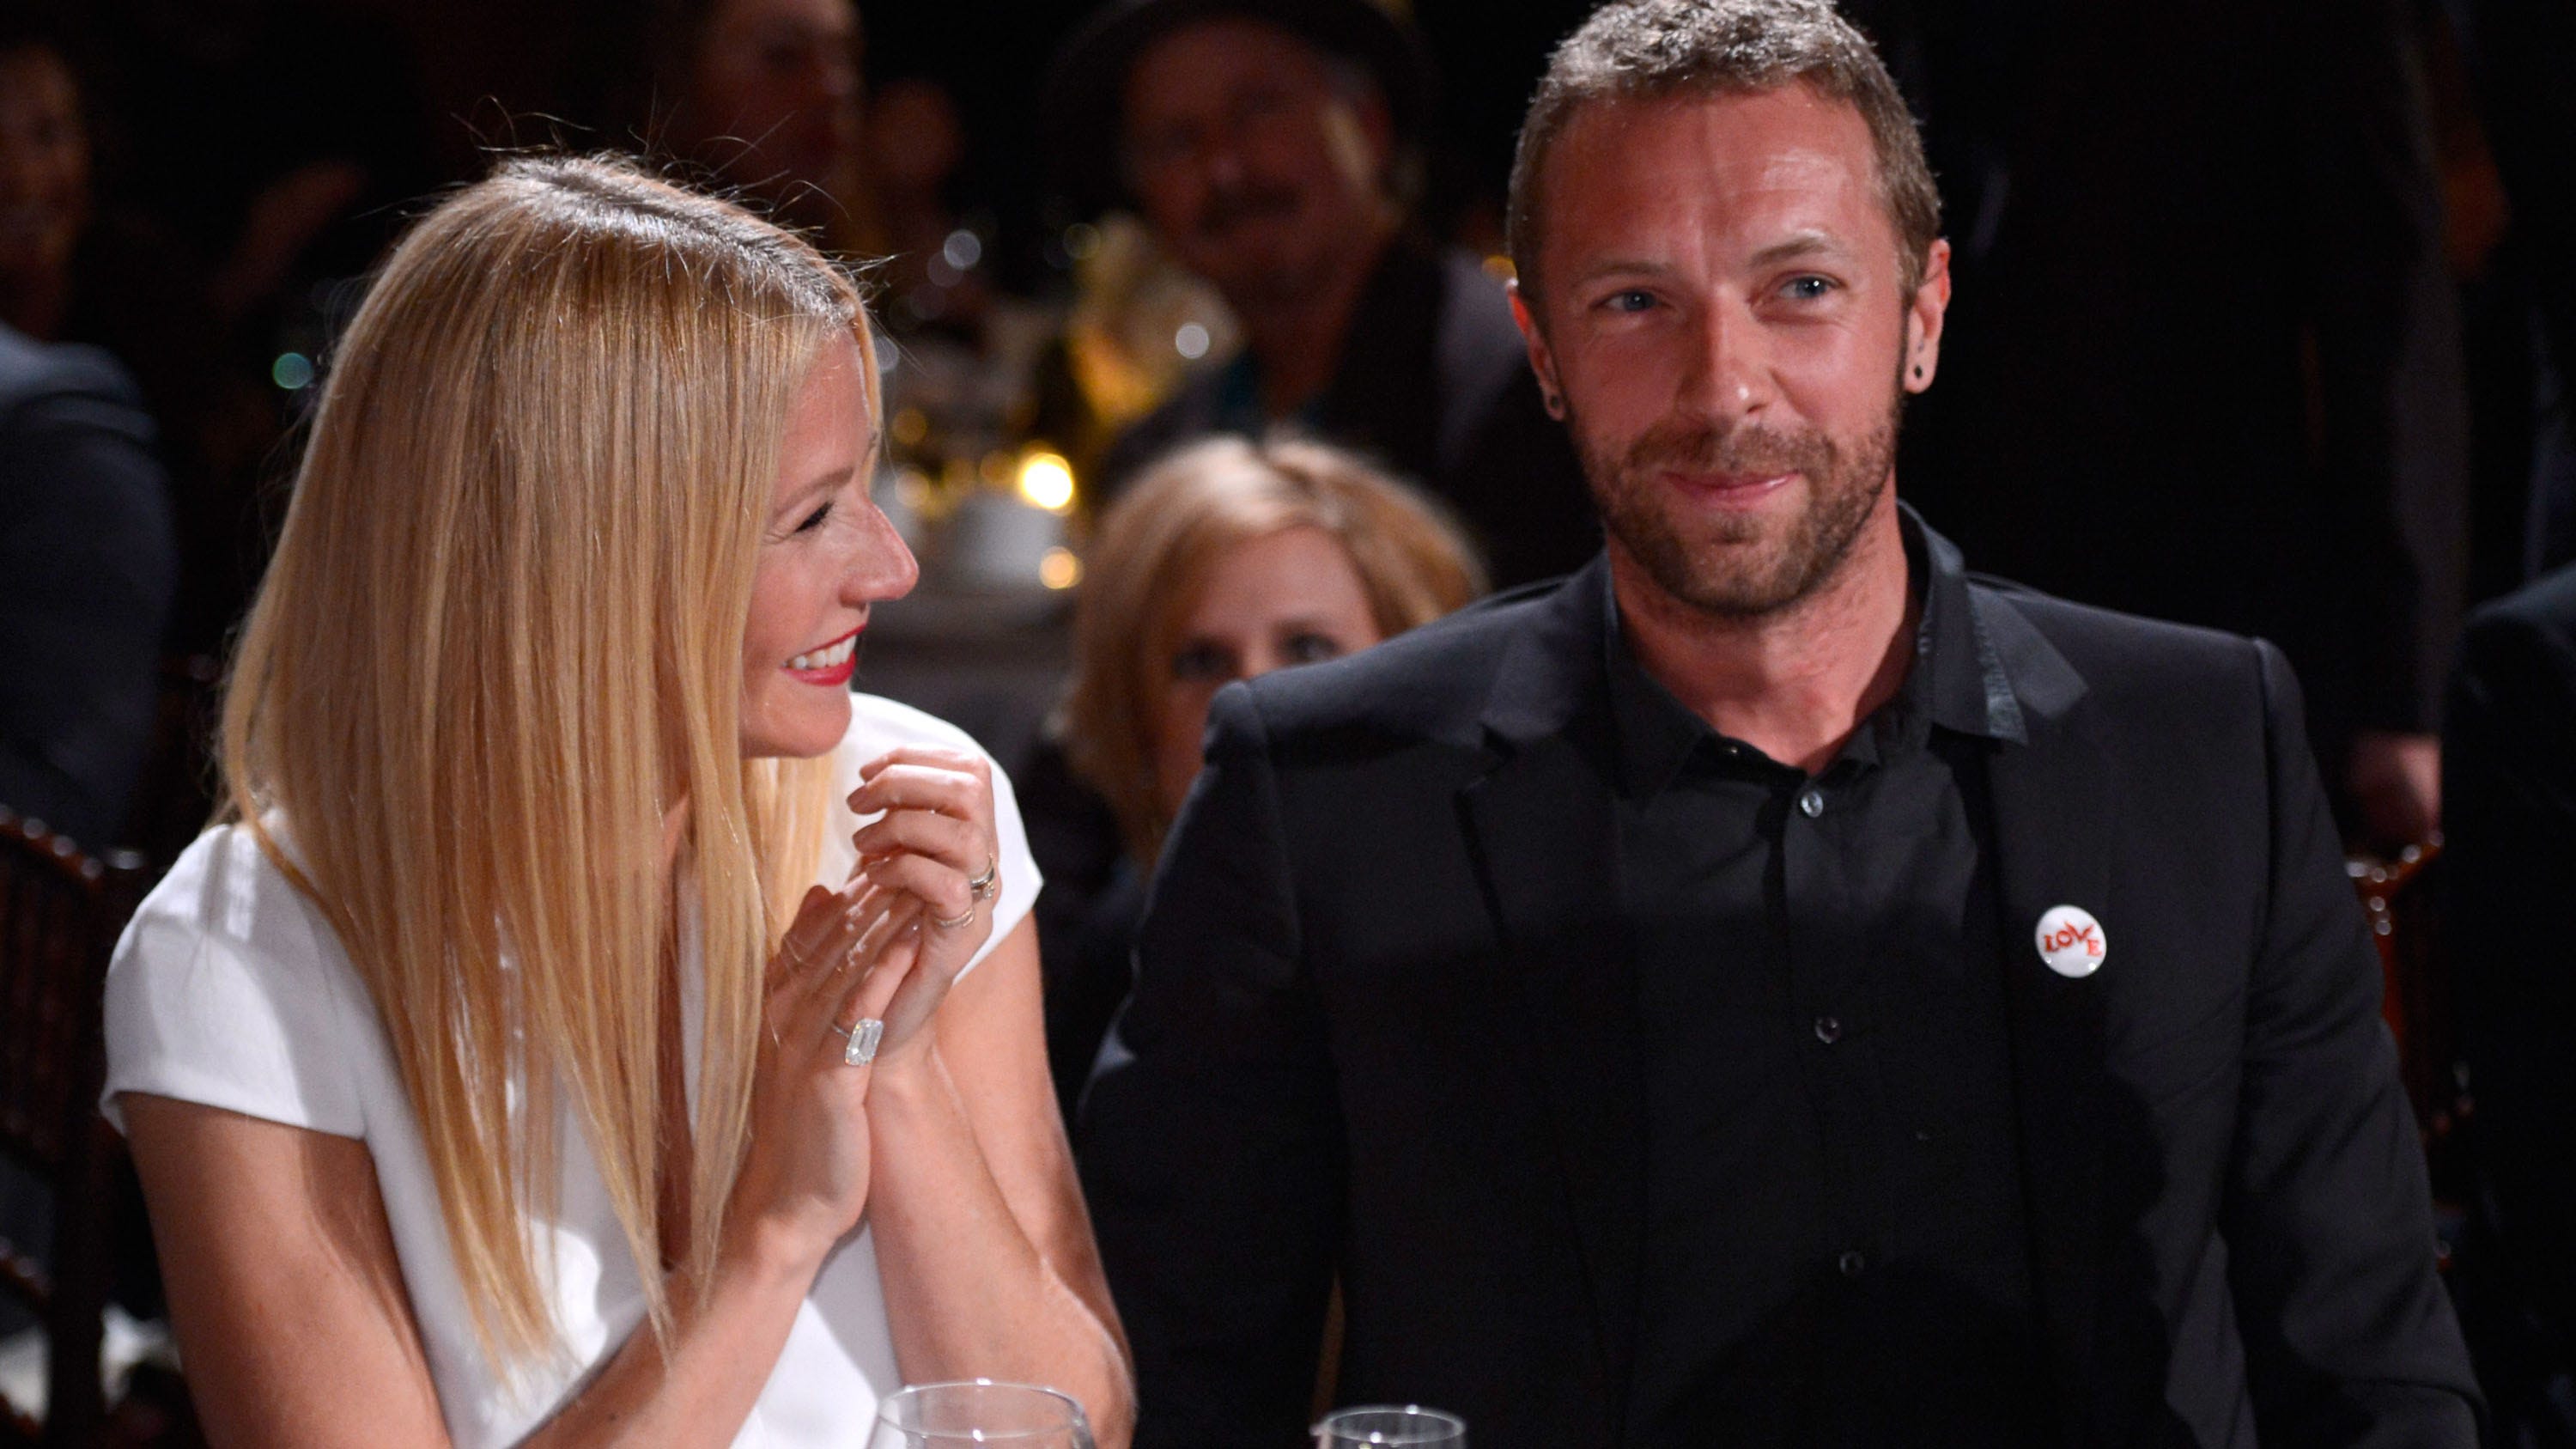 Gwyneth Paltrow reflects on the split from Chris Martin: ‘I never wanted to get divorced’